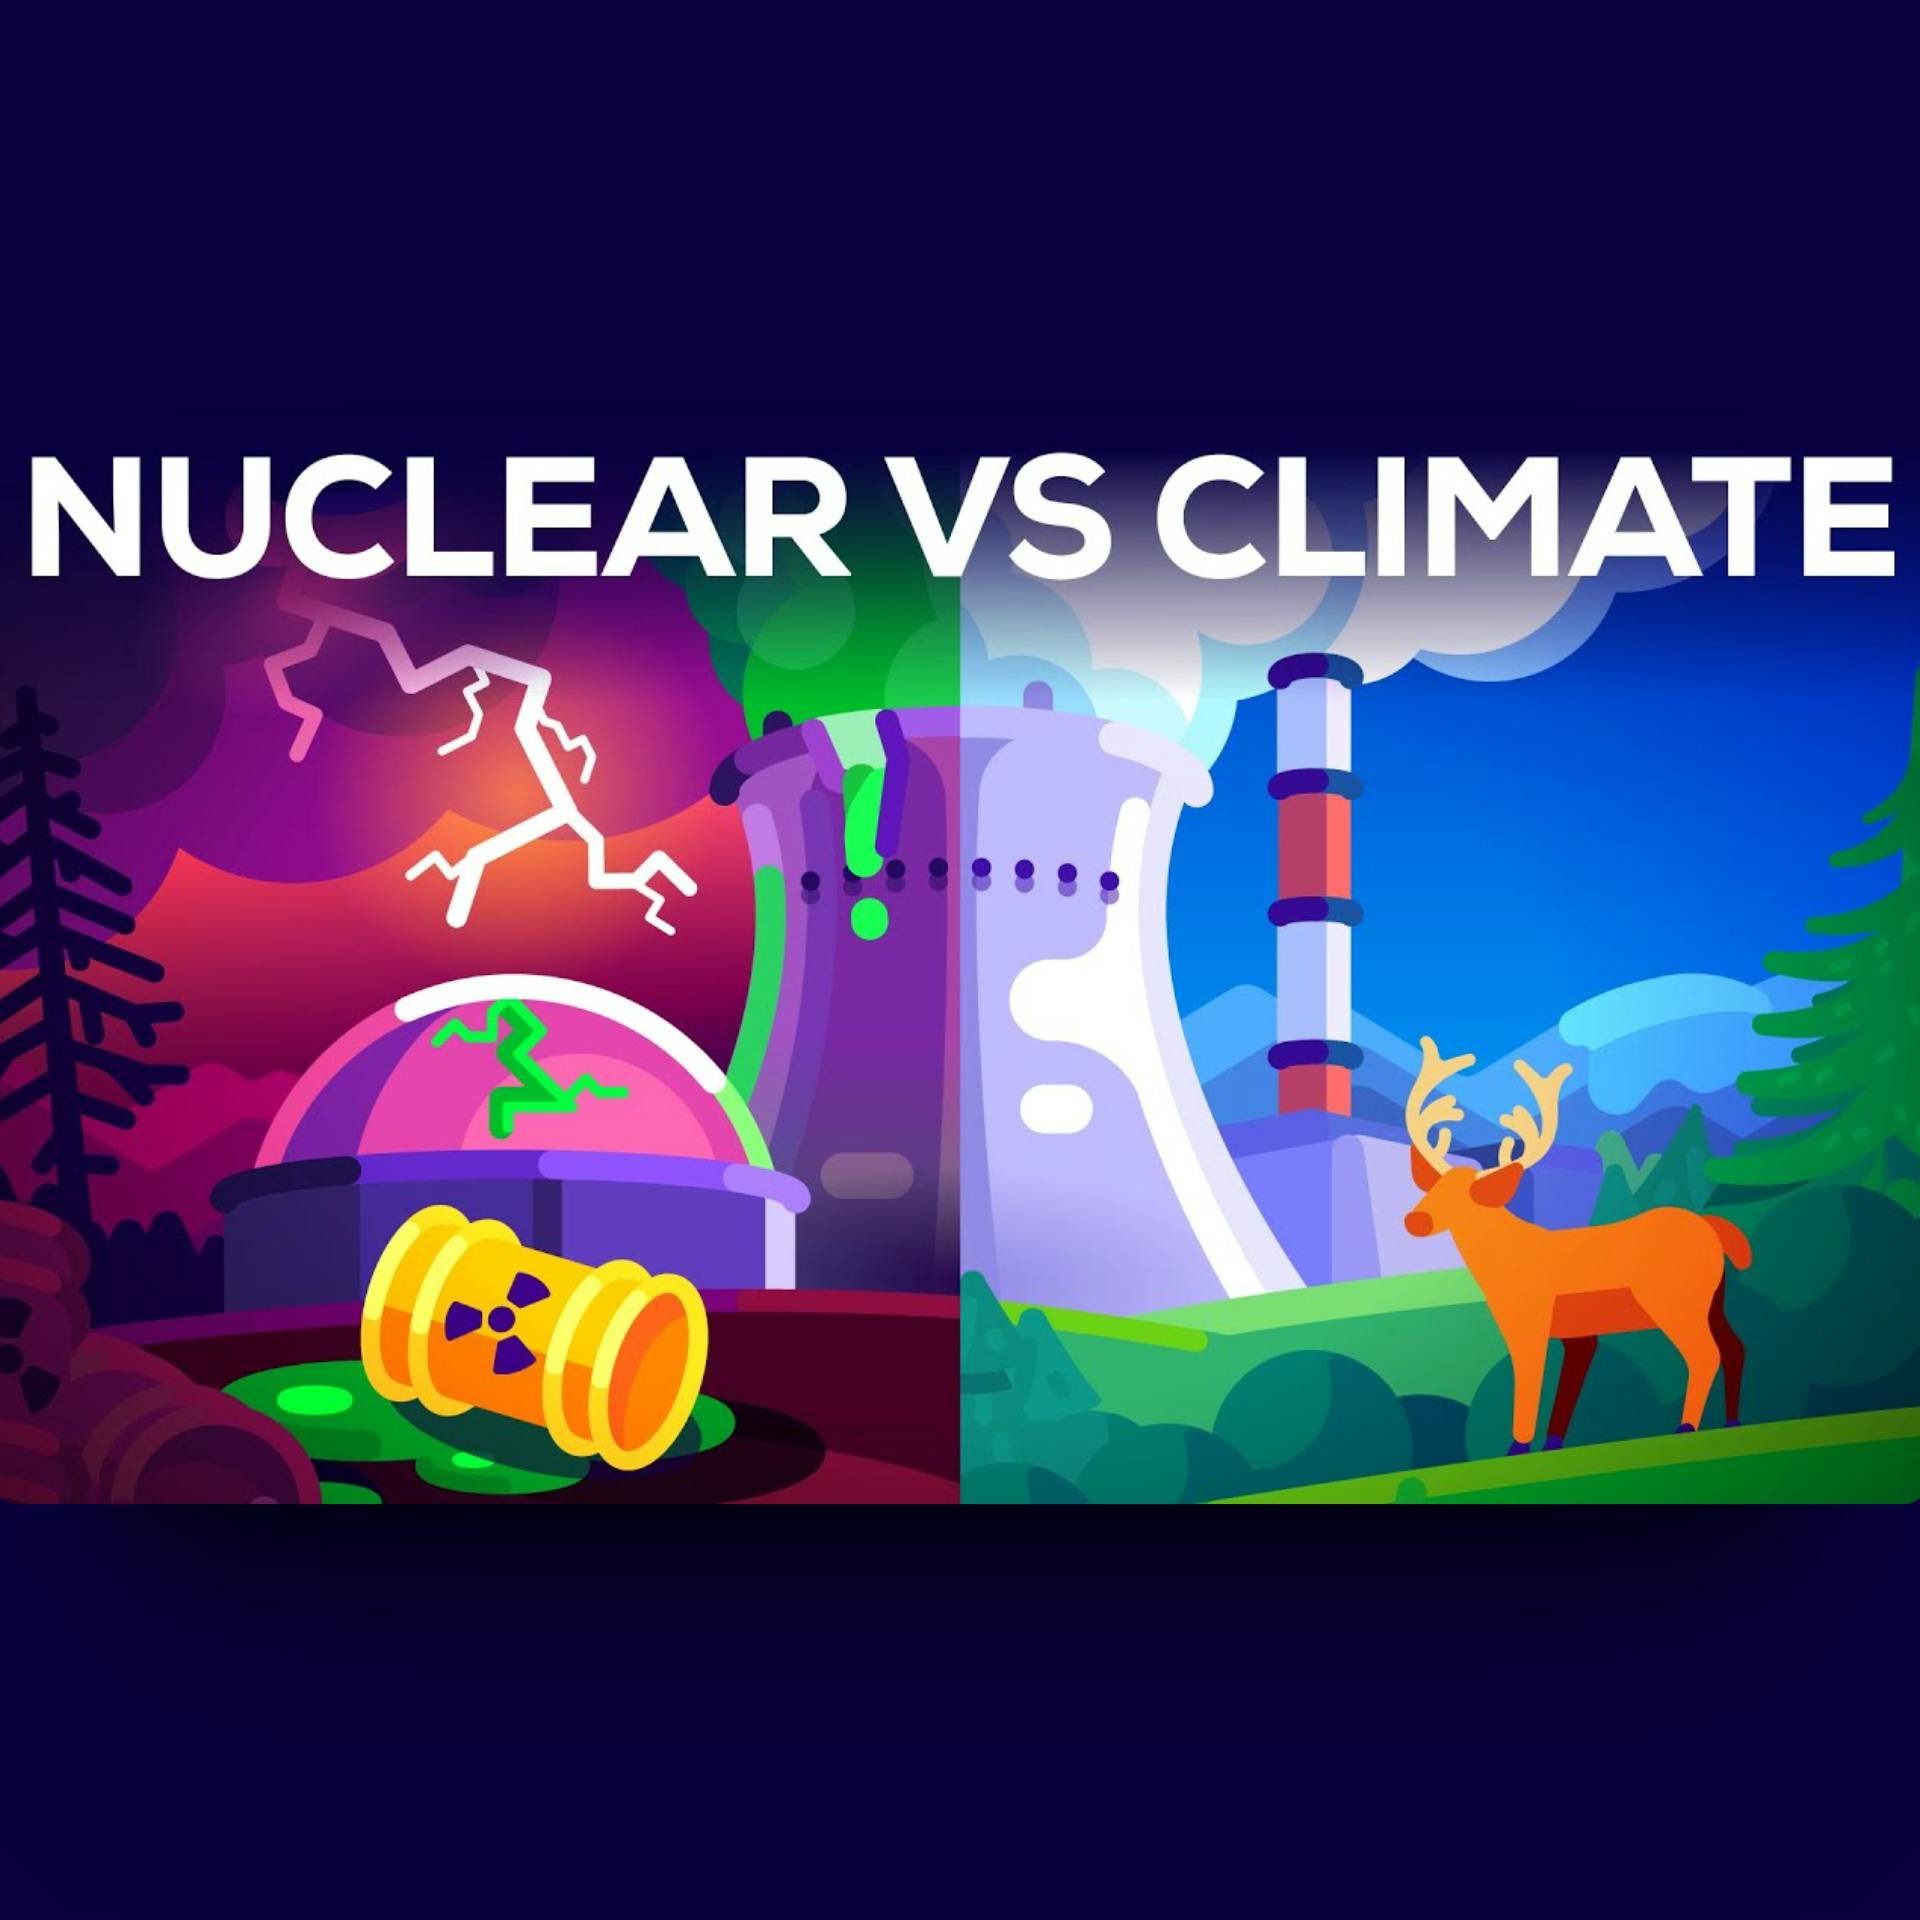 Do we Need Nuclear Energy to Stop Climate Change?